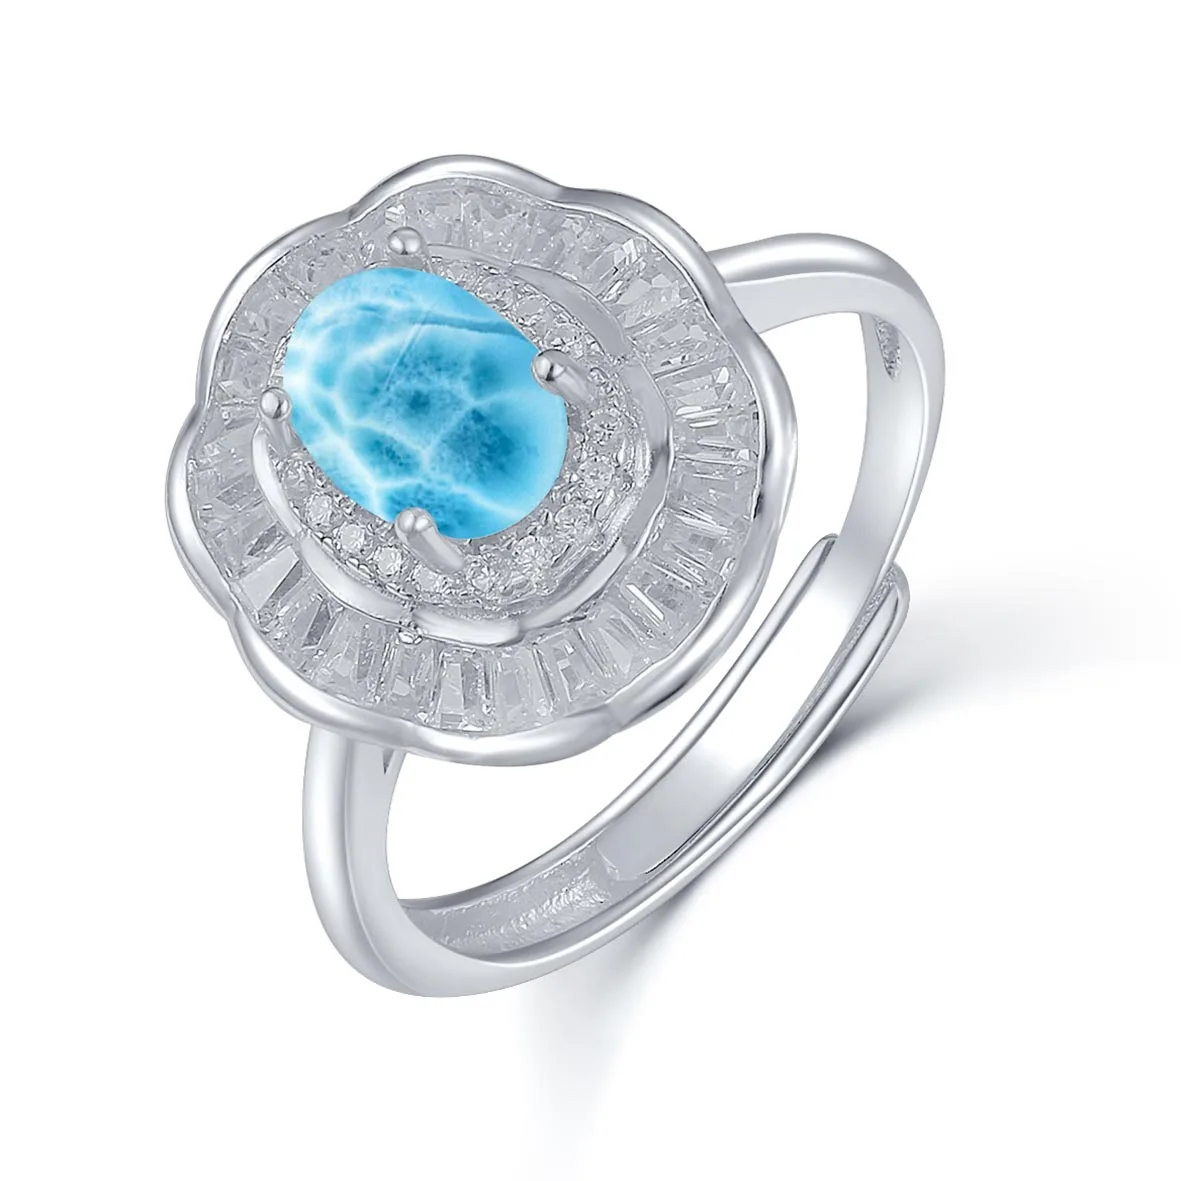 

Hot Selling 925 Sterling Silver 0.75ct Oval Cut Larimar Adjustable Larimar Ring/Silver Larimar Ring For Wedding Jewelry